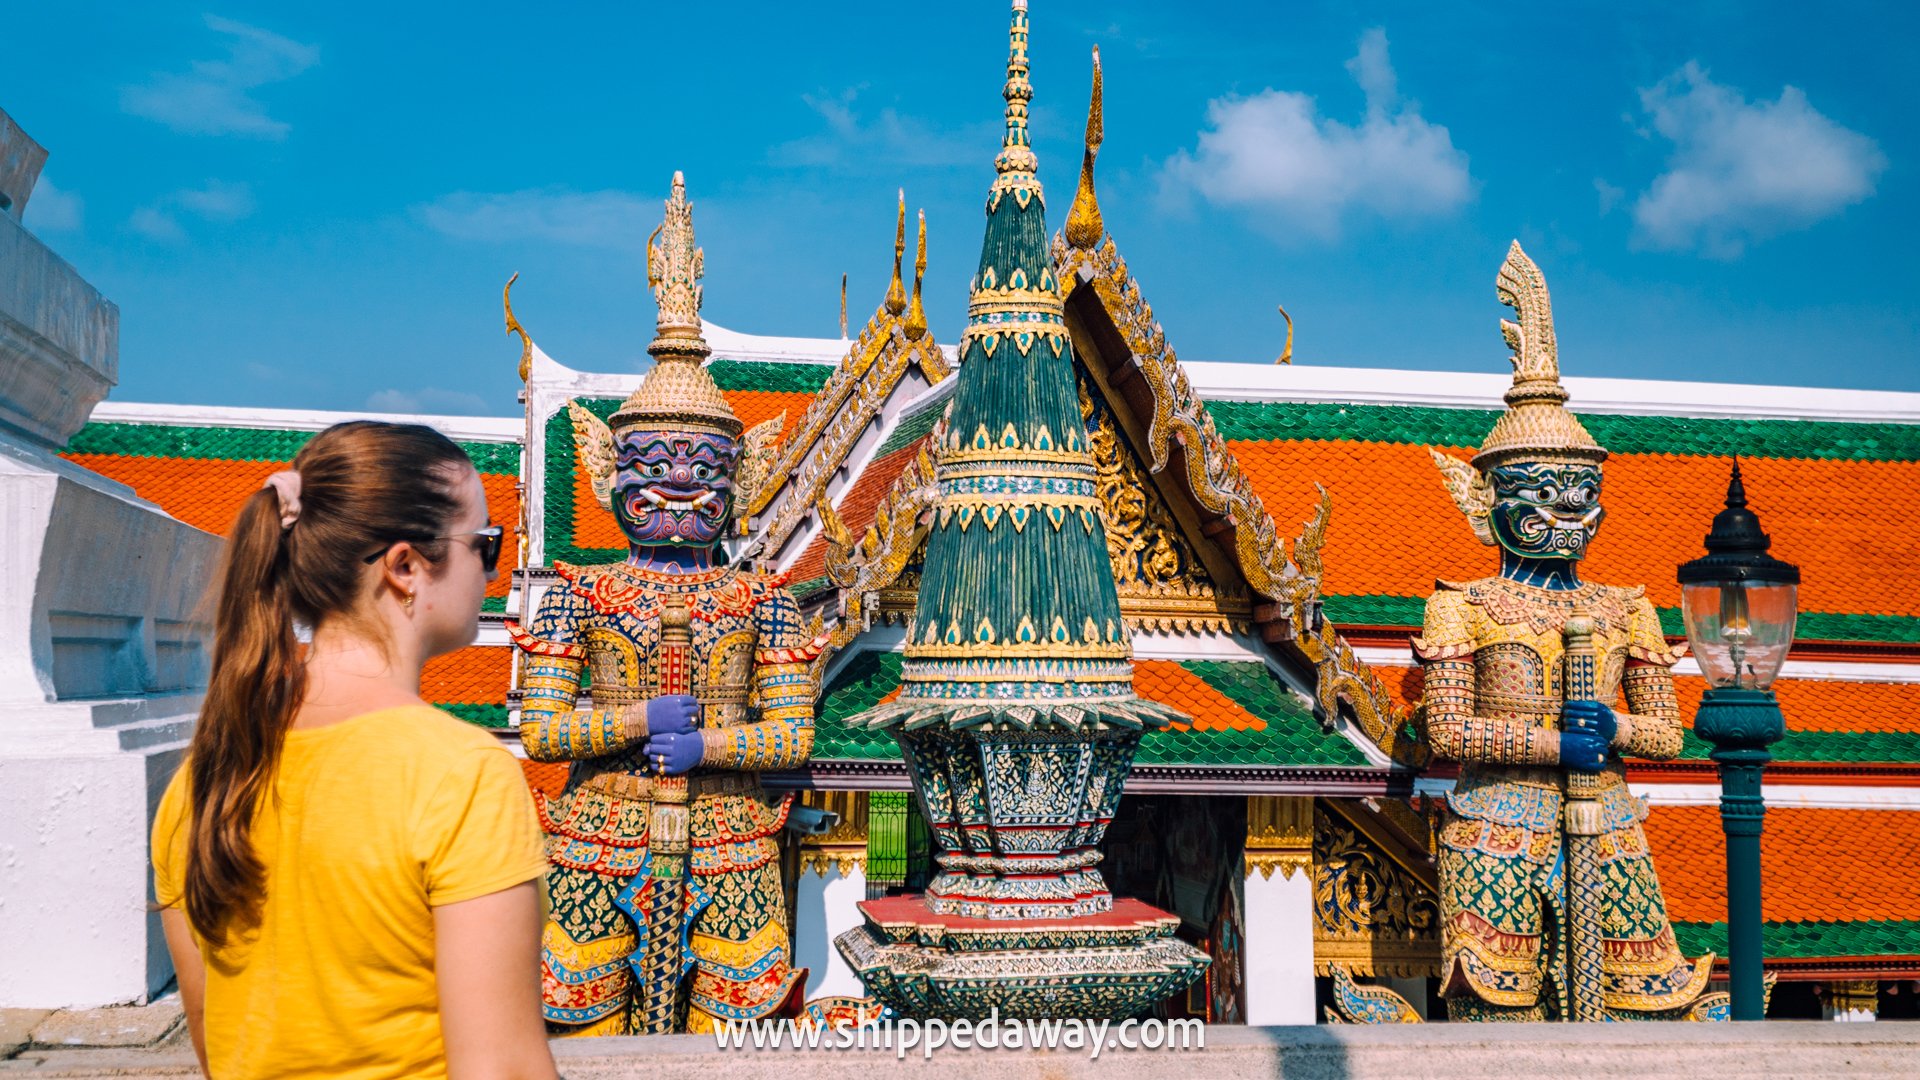 Grand Palace Bangkok Travel Guide, Things to do in the Grand Palace in Bangkok, tips for visiting grand palace in bangkok, royal palace bangkok, best time to visit grand palace in bangkok